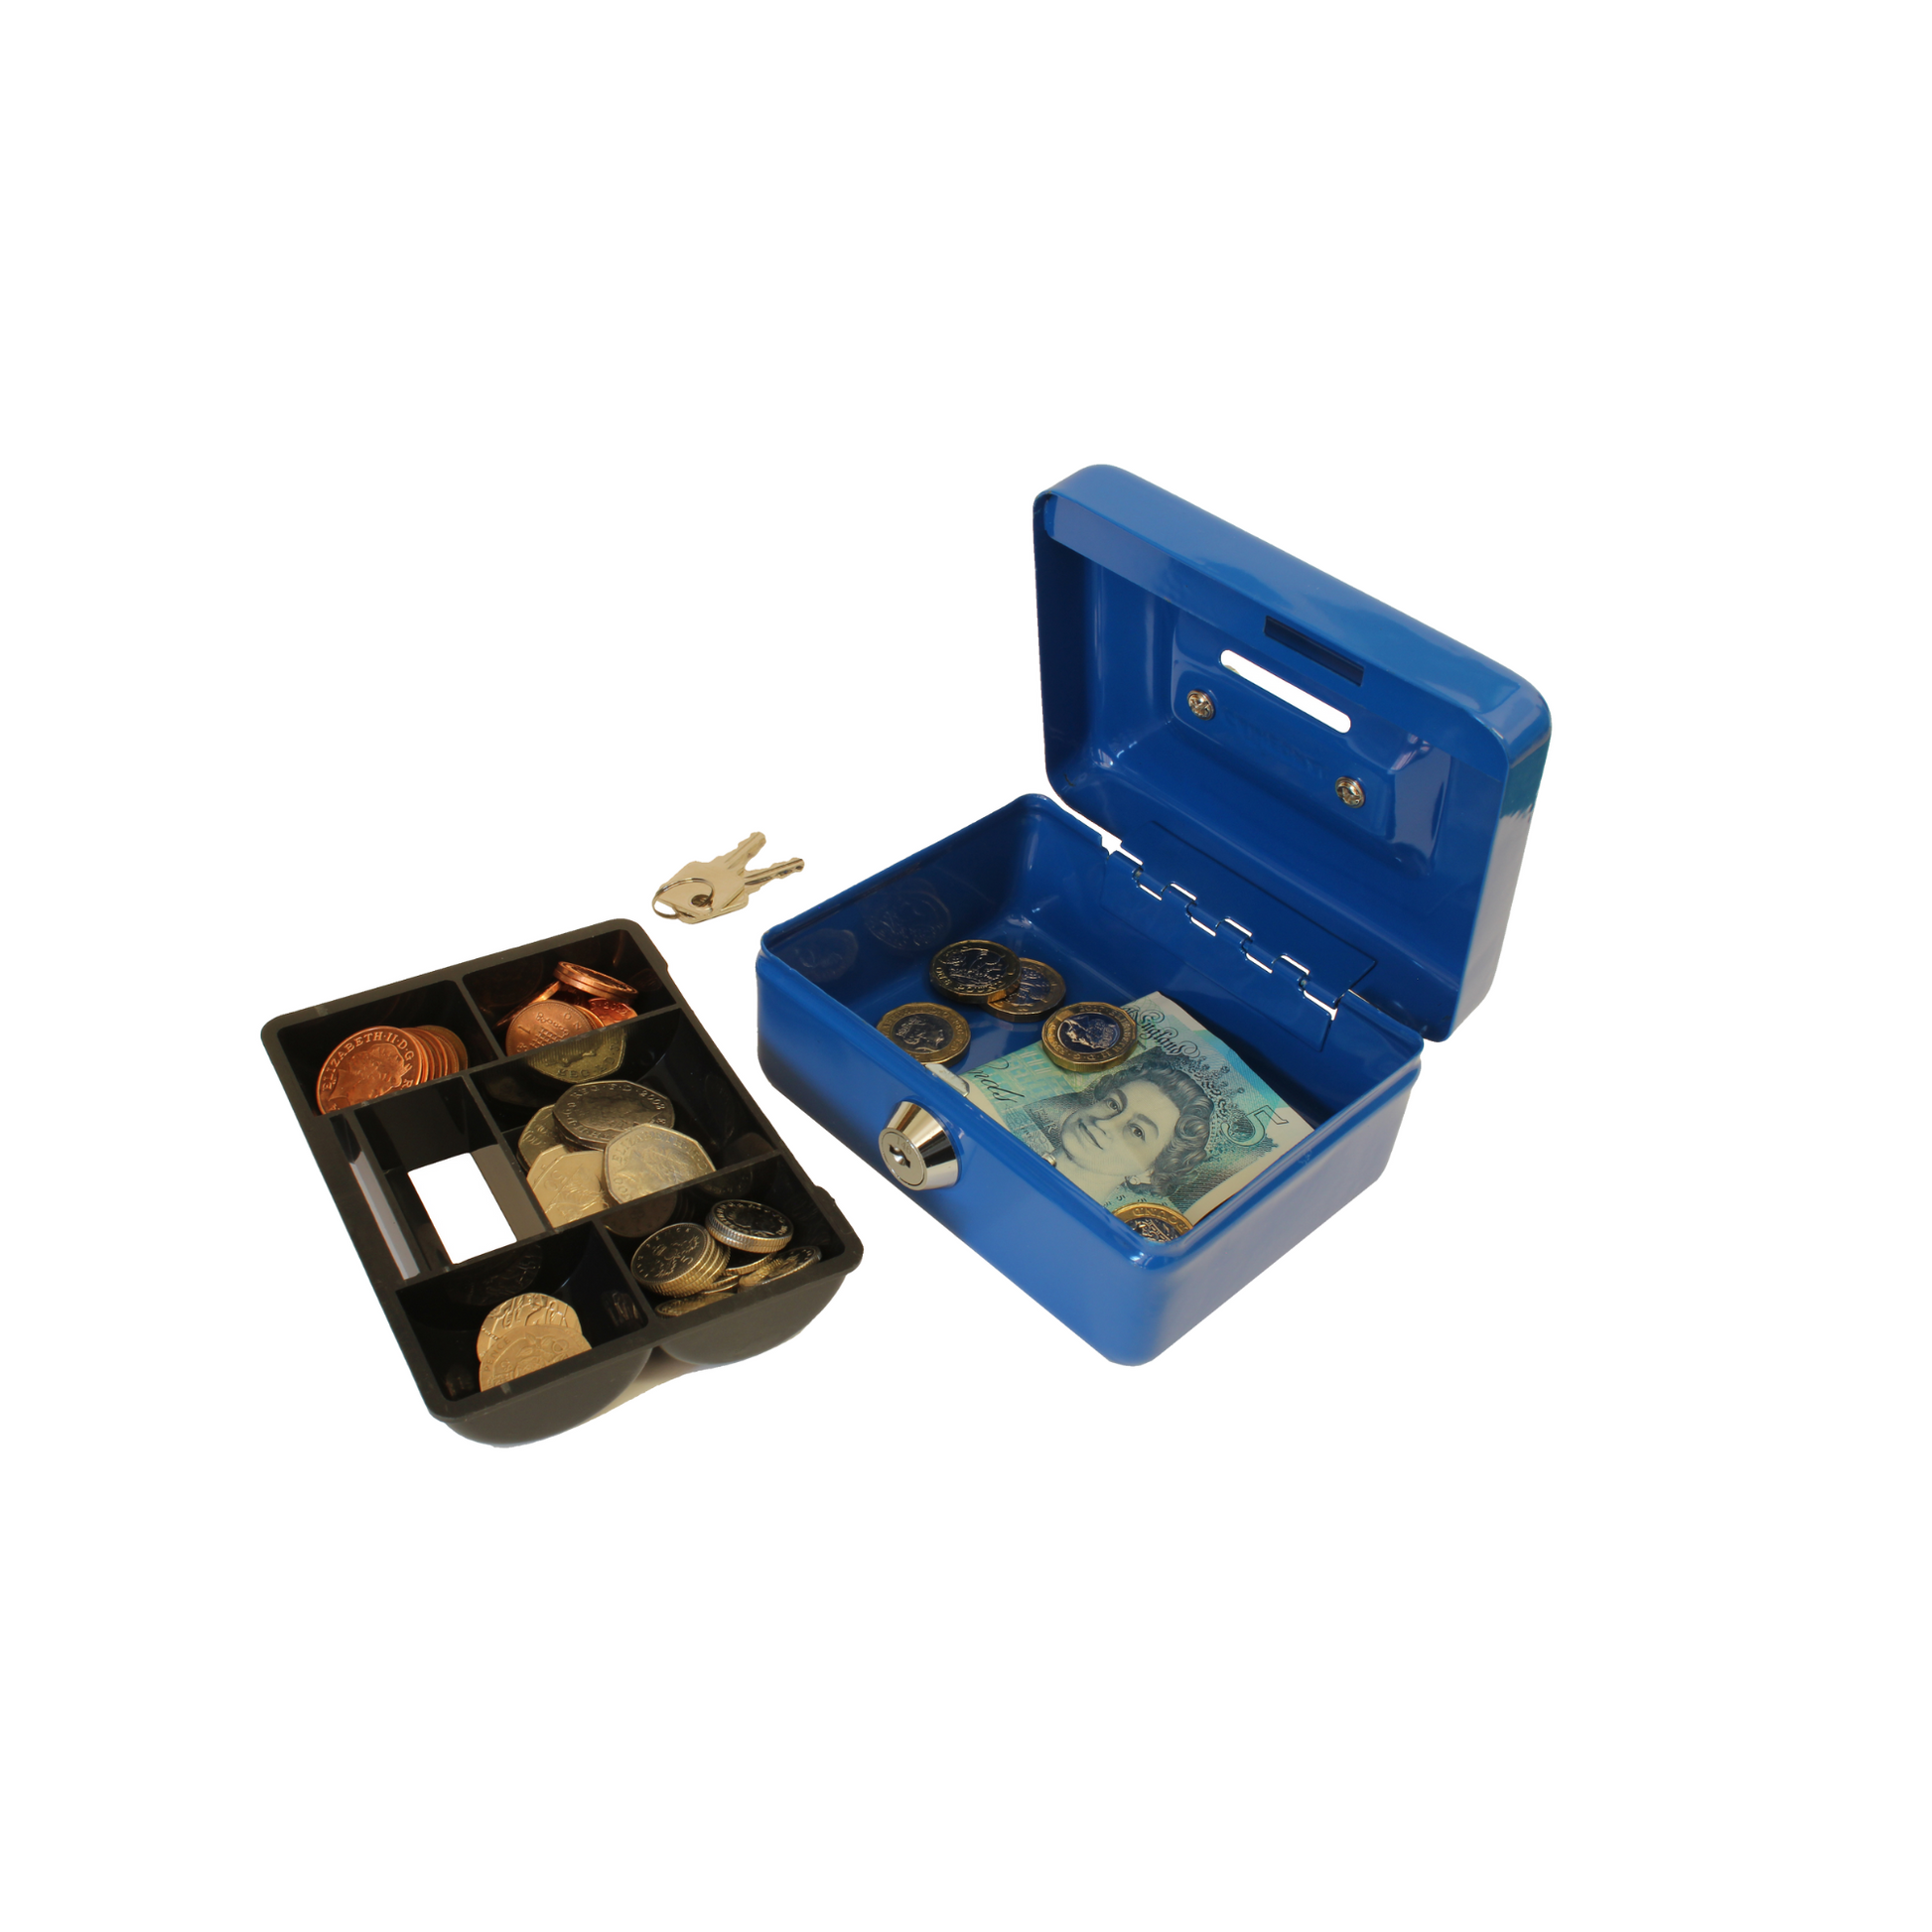 An open, bright blue, 4-inch key lockable cash box with a coin slot in the lid and a removable 5-compartment coin tray, displaying an assortment of coins and banknotes. Two keys are placed beside the box, indicating its secure lock mechanism.